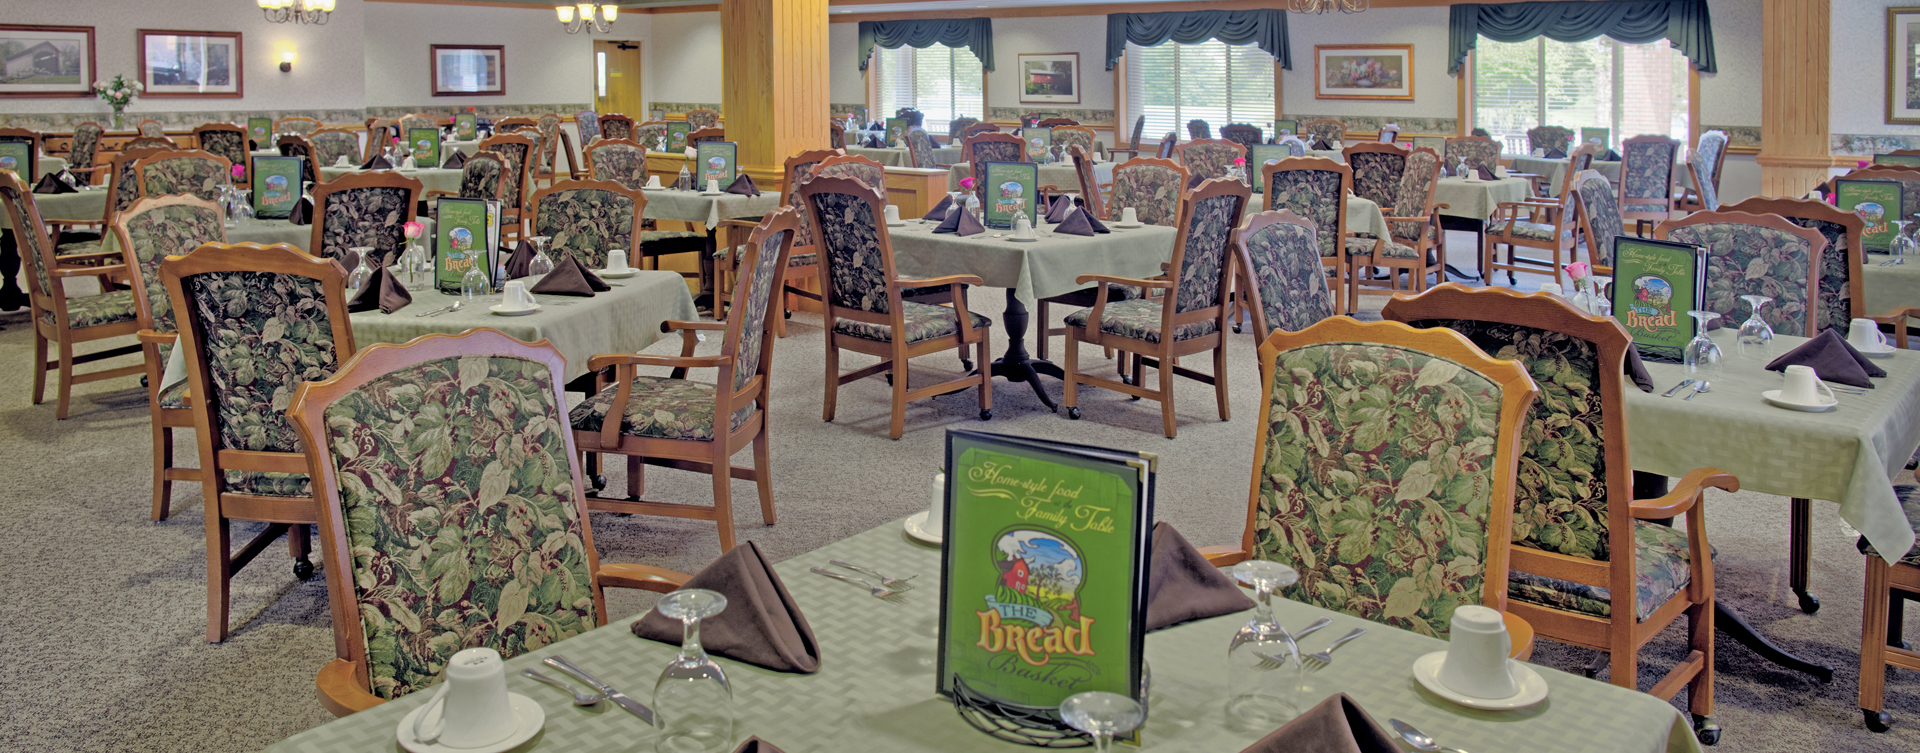 Enjoy homestyle food with made-from-scratch recipes in our dining room at Bickford of Lancaster